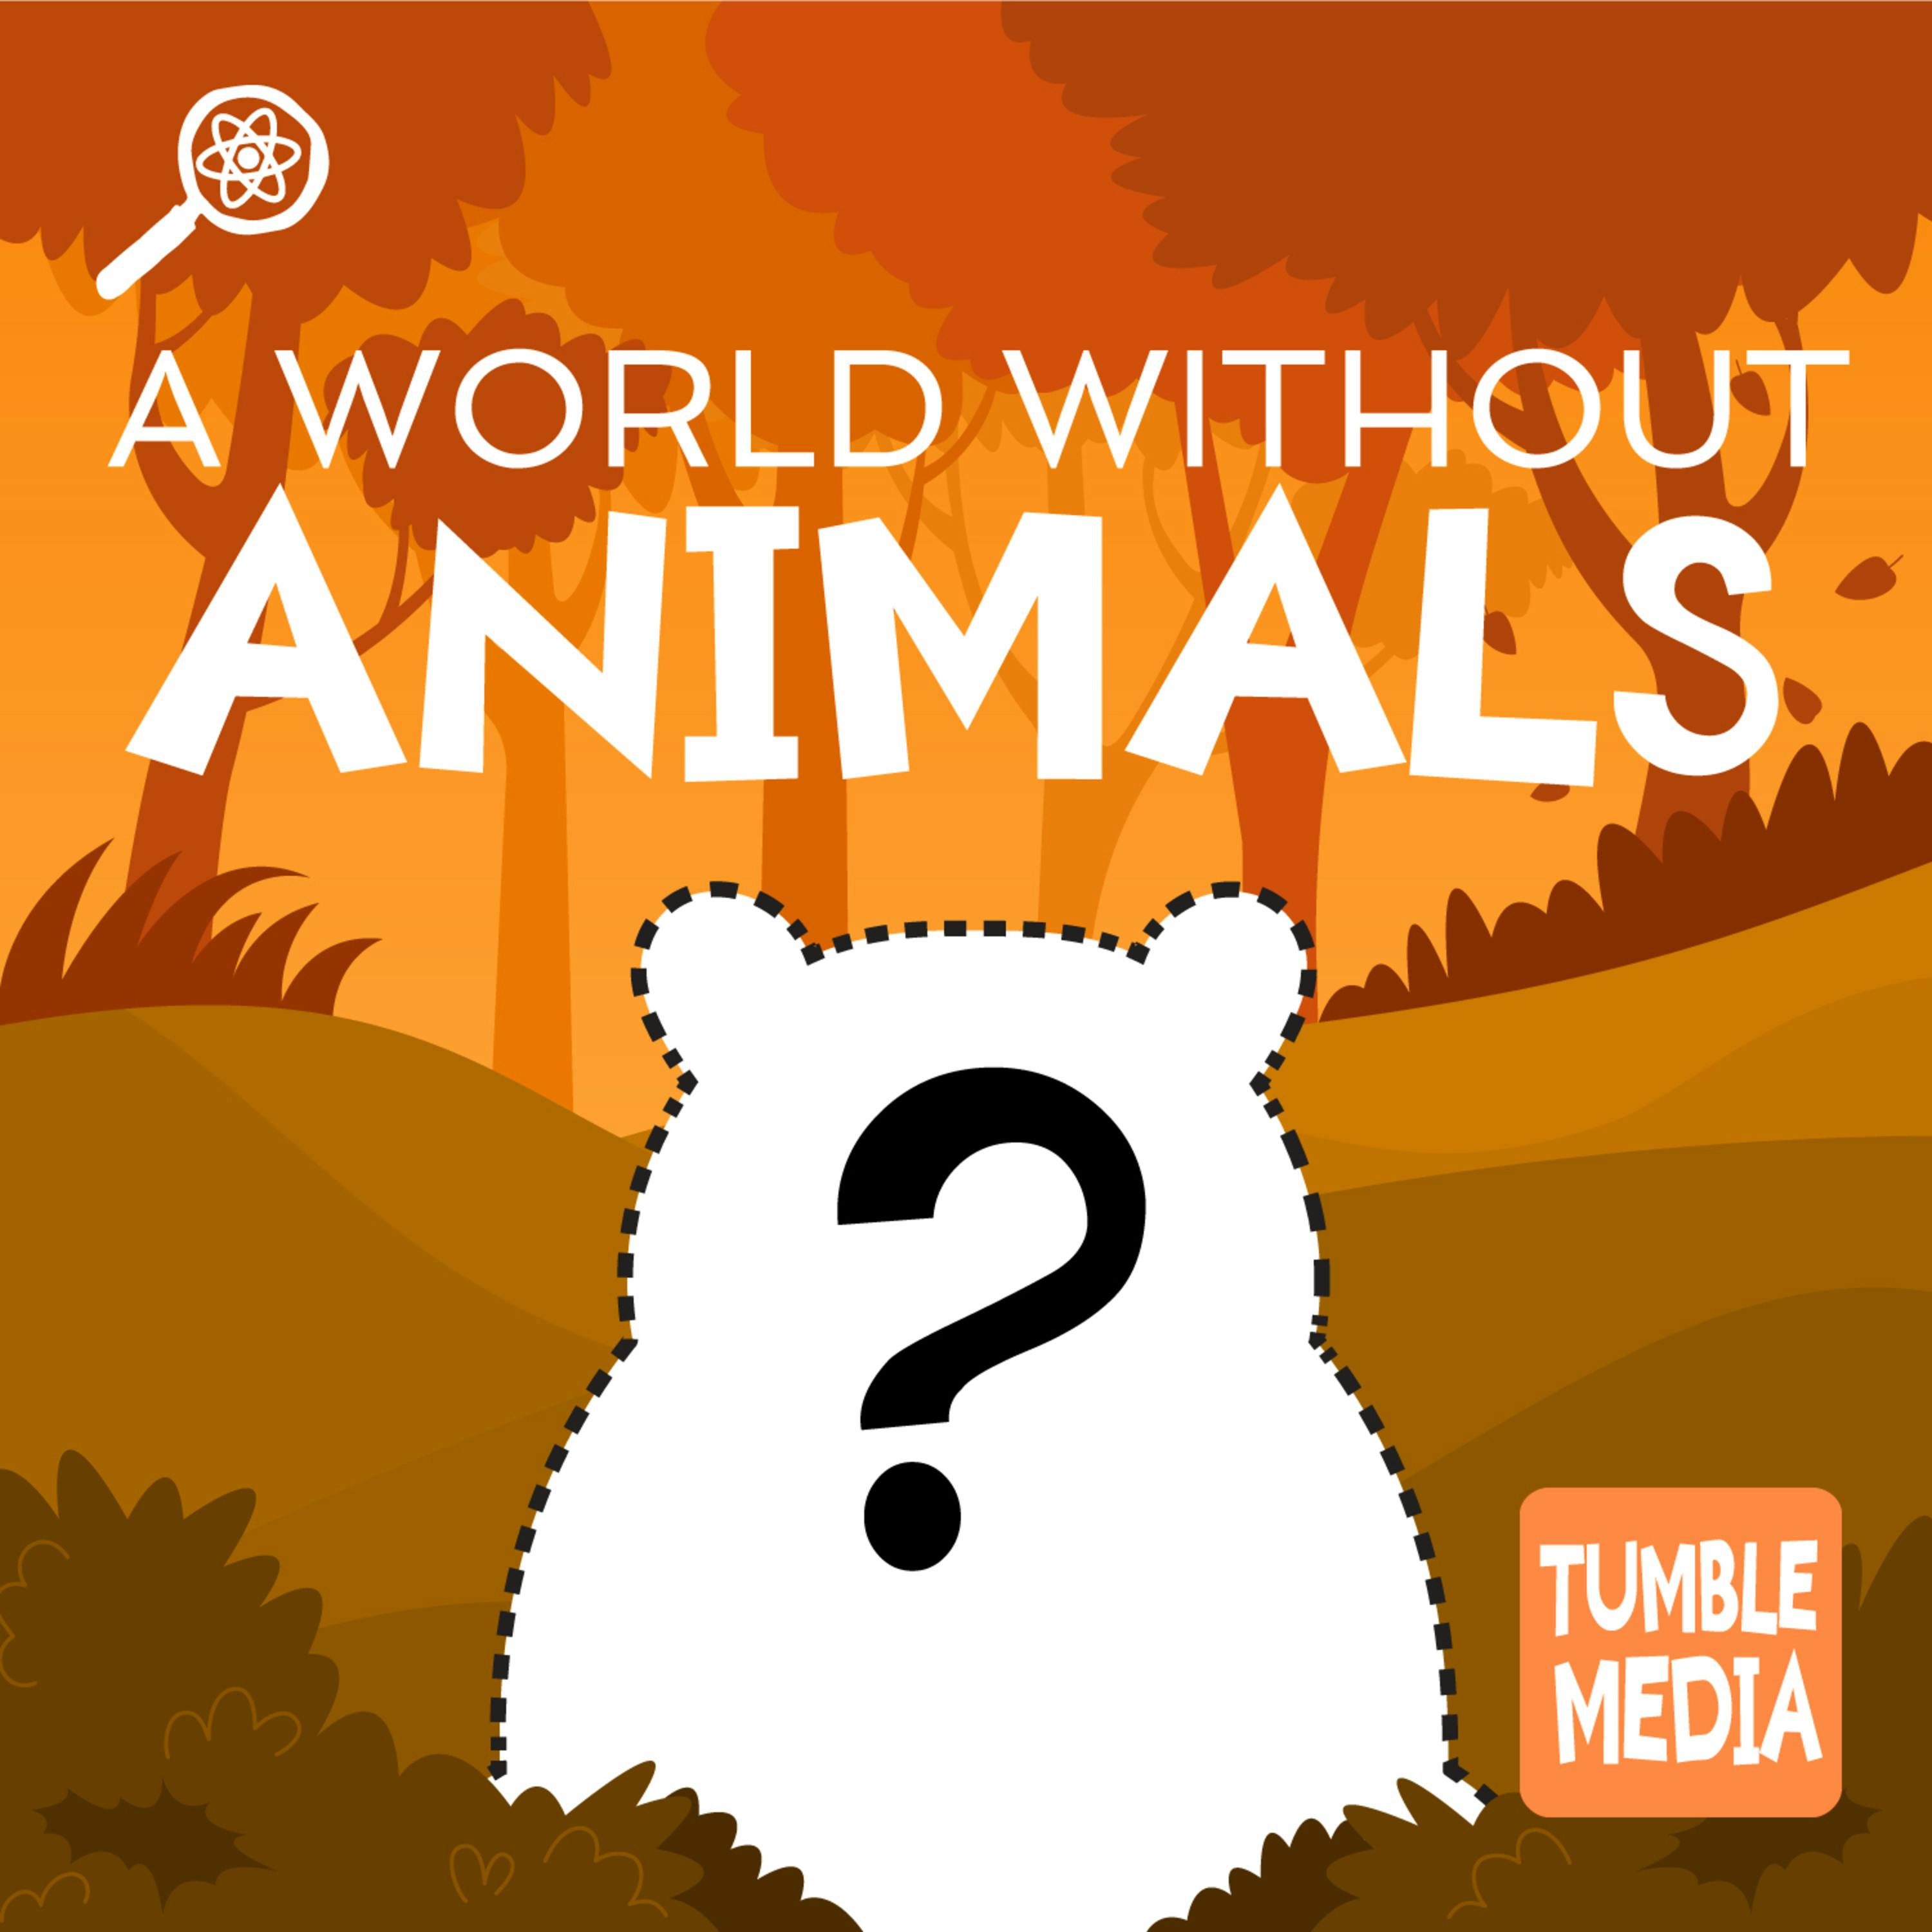 What If There Were No Animals?